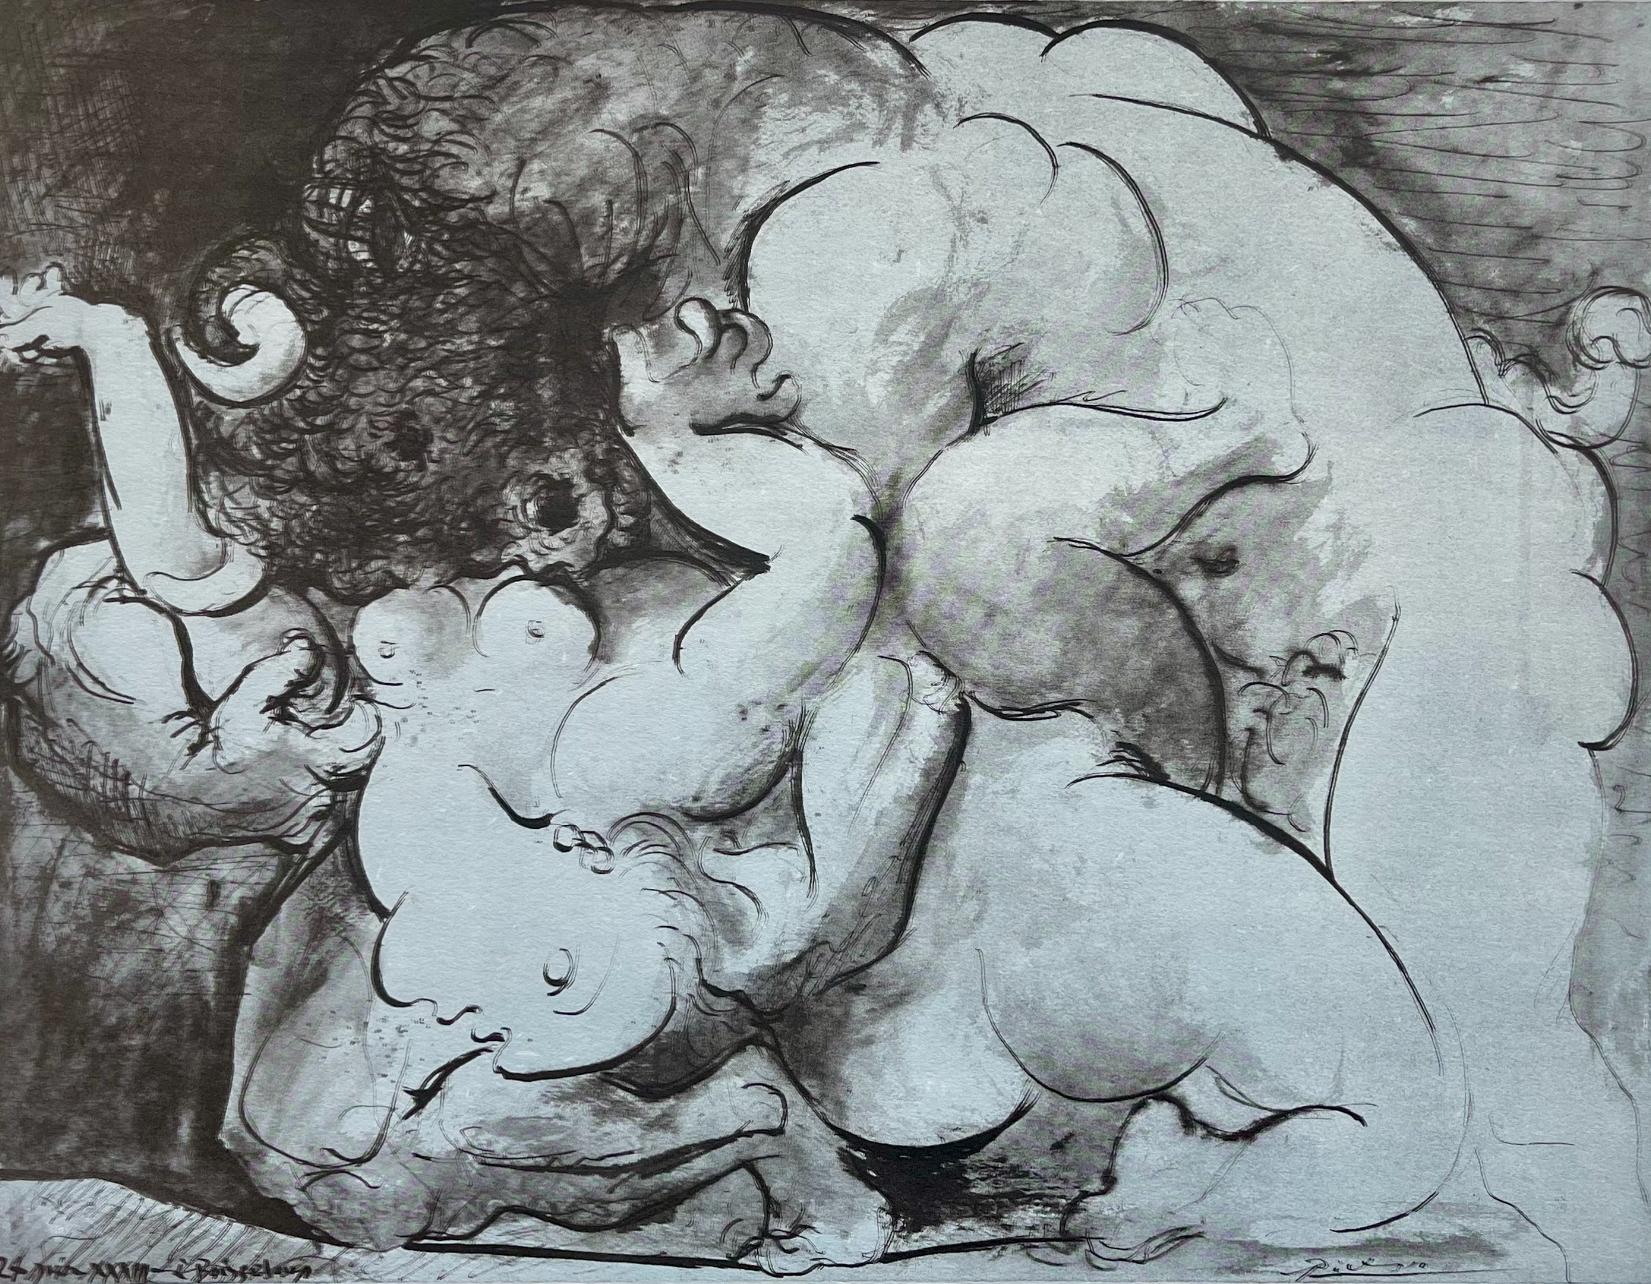 Picasso, Minotaur, Picasso: Fifteen Drawings (after)